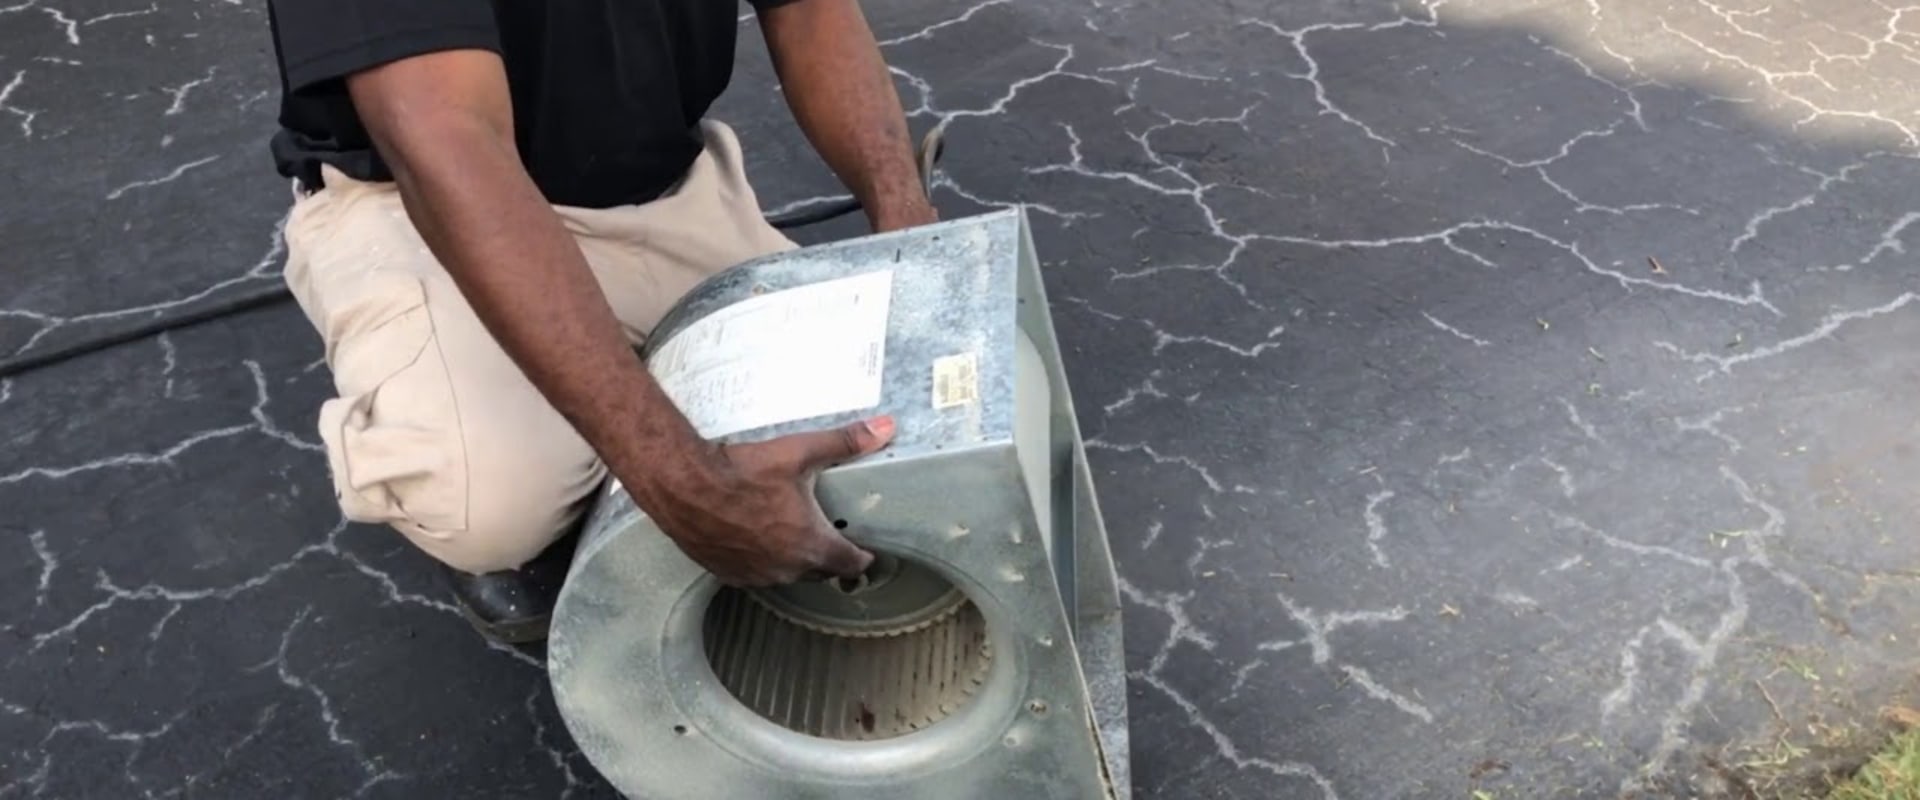 Finding Qualified Contractors for Duct Sealing Services in Miami-Dade County, FL